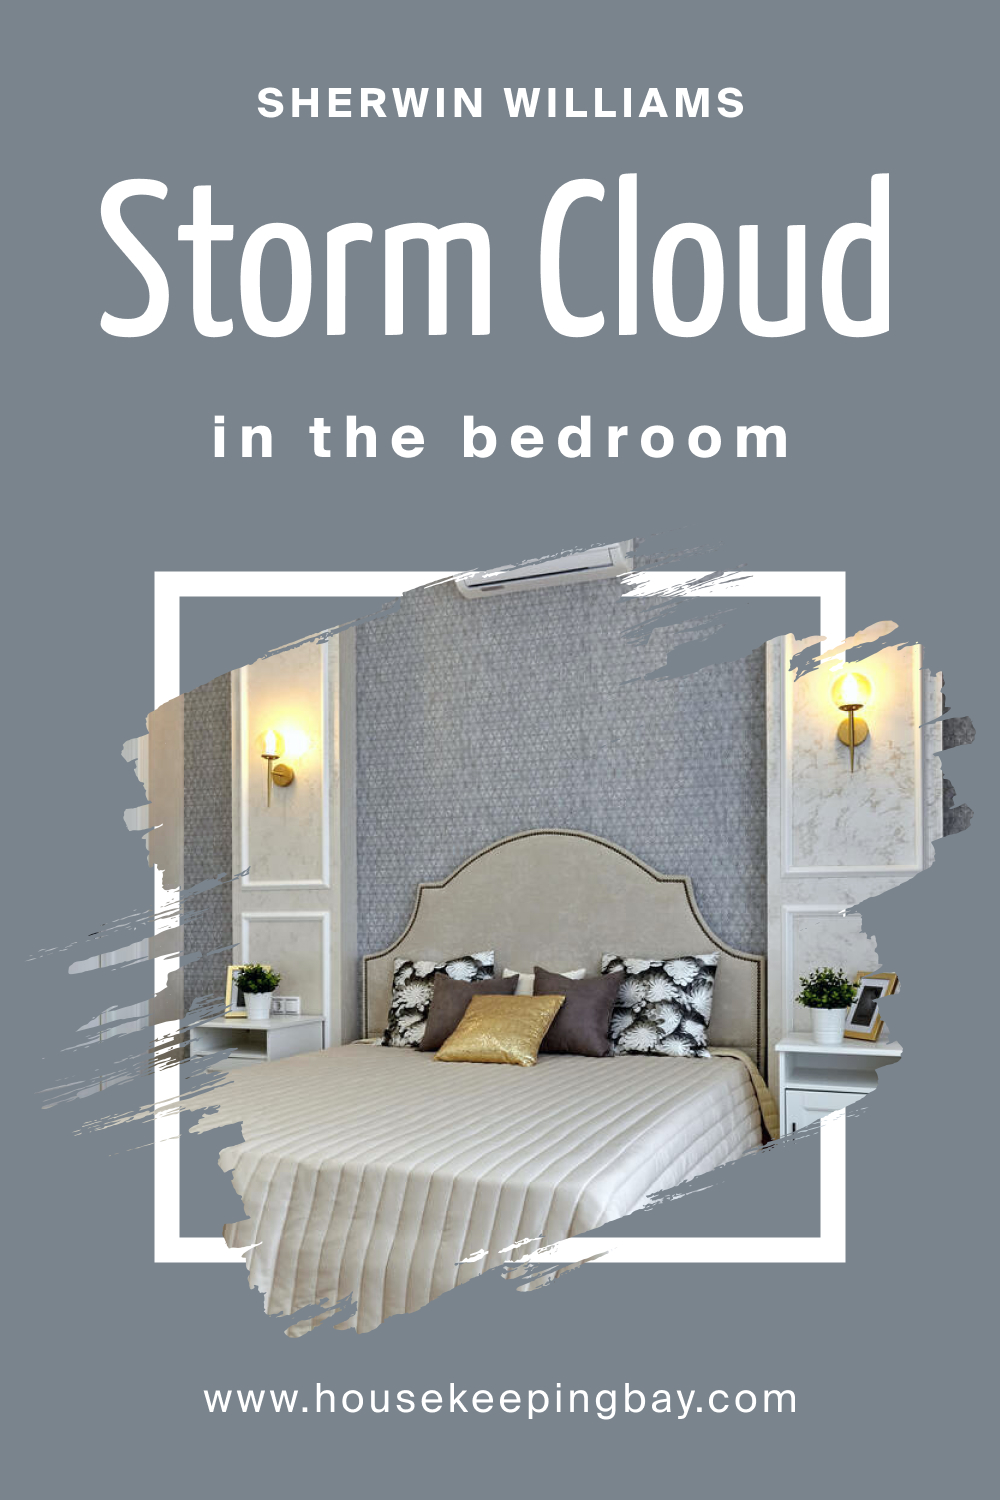 Sherwin Williams. SW 6249 Storm Cloud For the bedroom